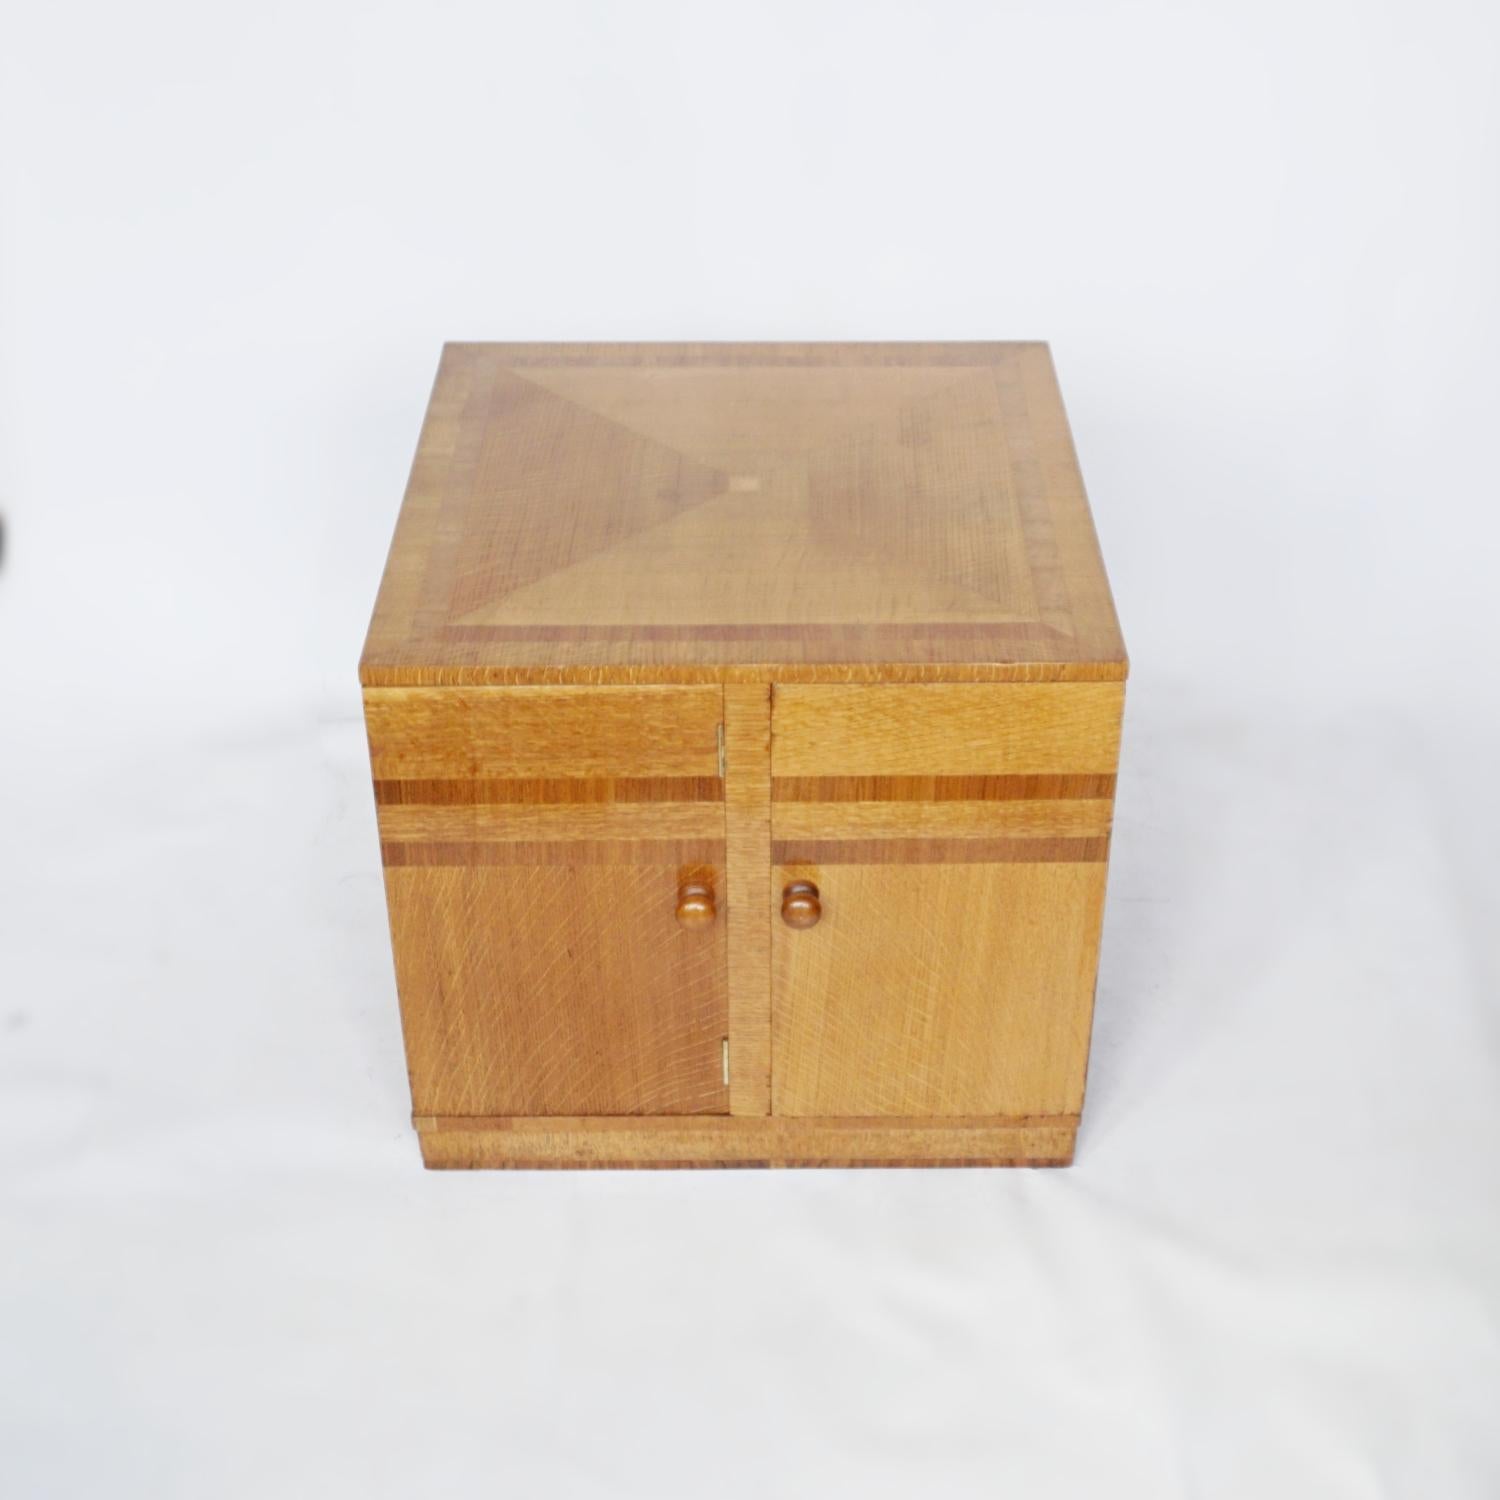 An Art Deco library table. Square form library table consisting of two cupboard doors for storage or larger books, and two pull out book shelves/side tables. Oak veneered with figured walnut banding. Original wooden handles. 

Dimensions: H 56cm W